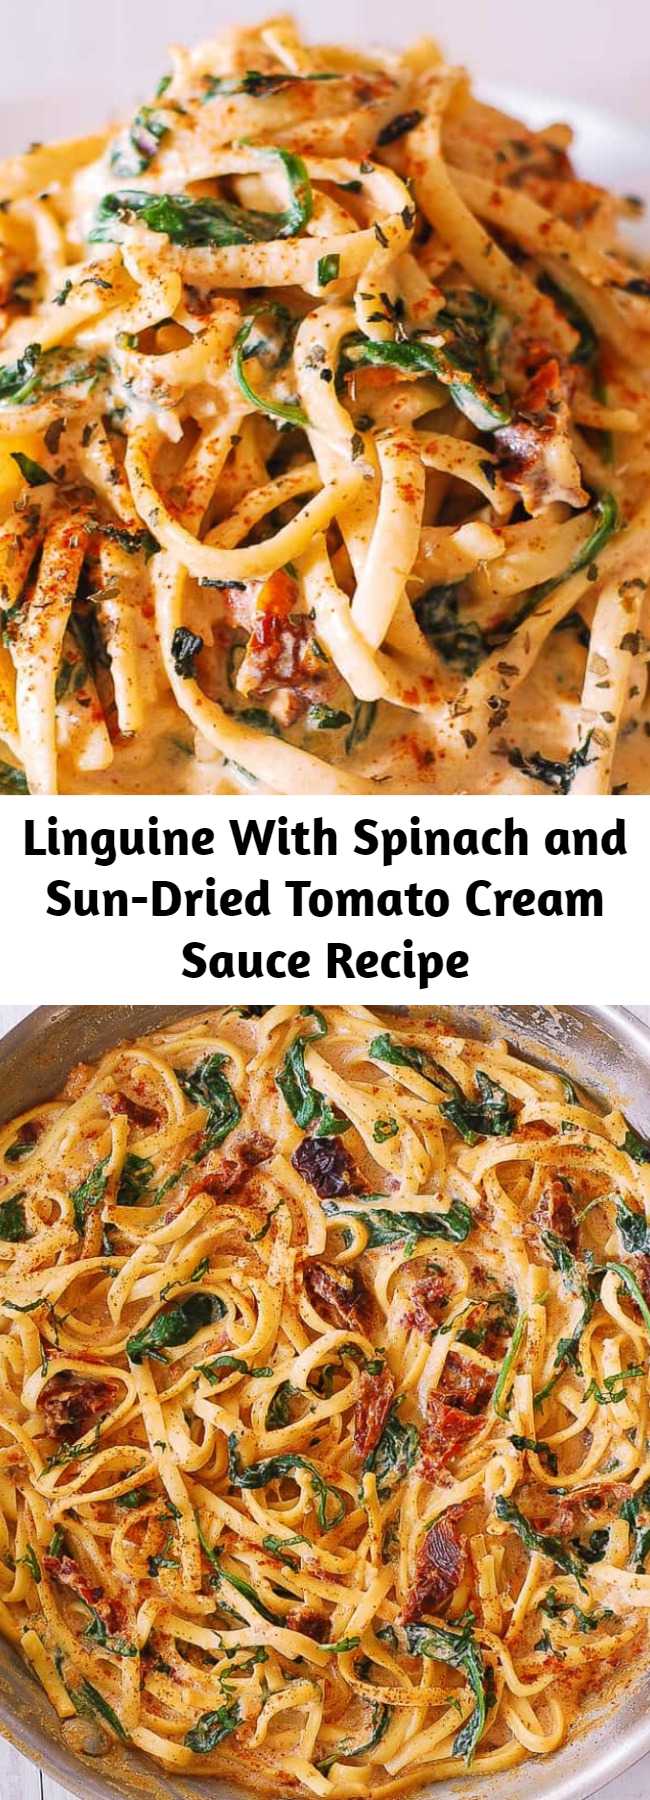 Linguine With Spinach and Sun-Dried Tomato Cream Sauce Recipe - Linguine with spinach and sun-dried tomato cream sauce takes only 30 minutes to make! This simple Italian pasta requires only ingredients! This creamy linguine is a perfect weeknight dinner! Linguine is generously coated in a comforting creamy sauce made with garlic and Parmesan cheese. #linguine #pasta #spinach #sundriedtomatoes #pastadinner #easypasta #weeknightdinner #easydinner #comfortfood #Italian #Italianpasta